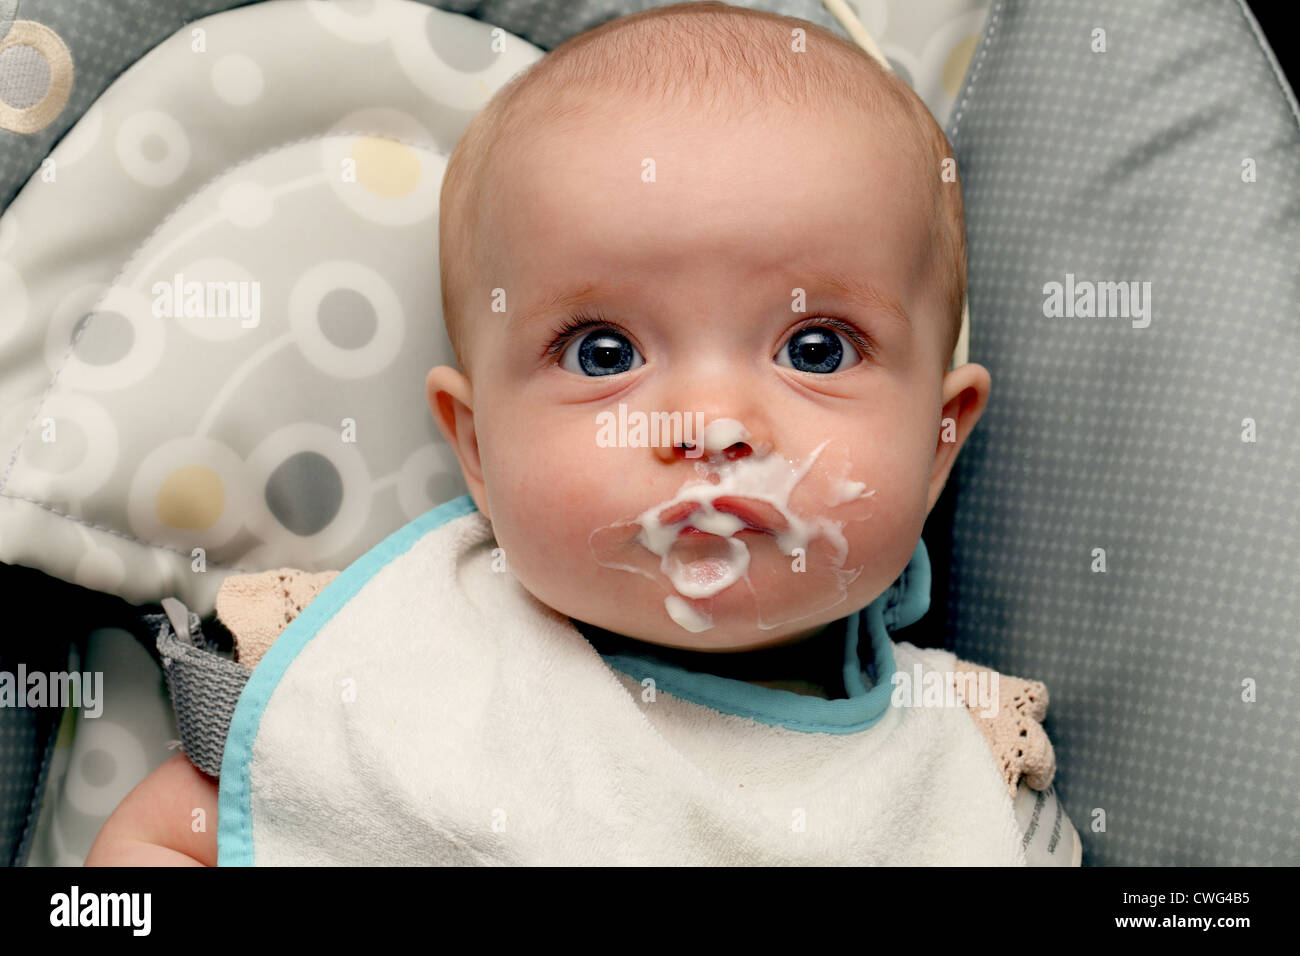 A 6 month old baby girl with food round her mouth Stock Photo